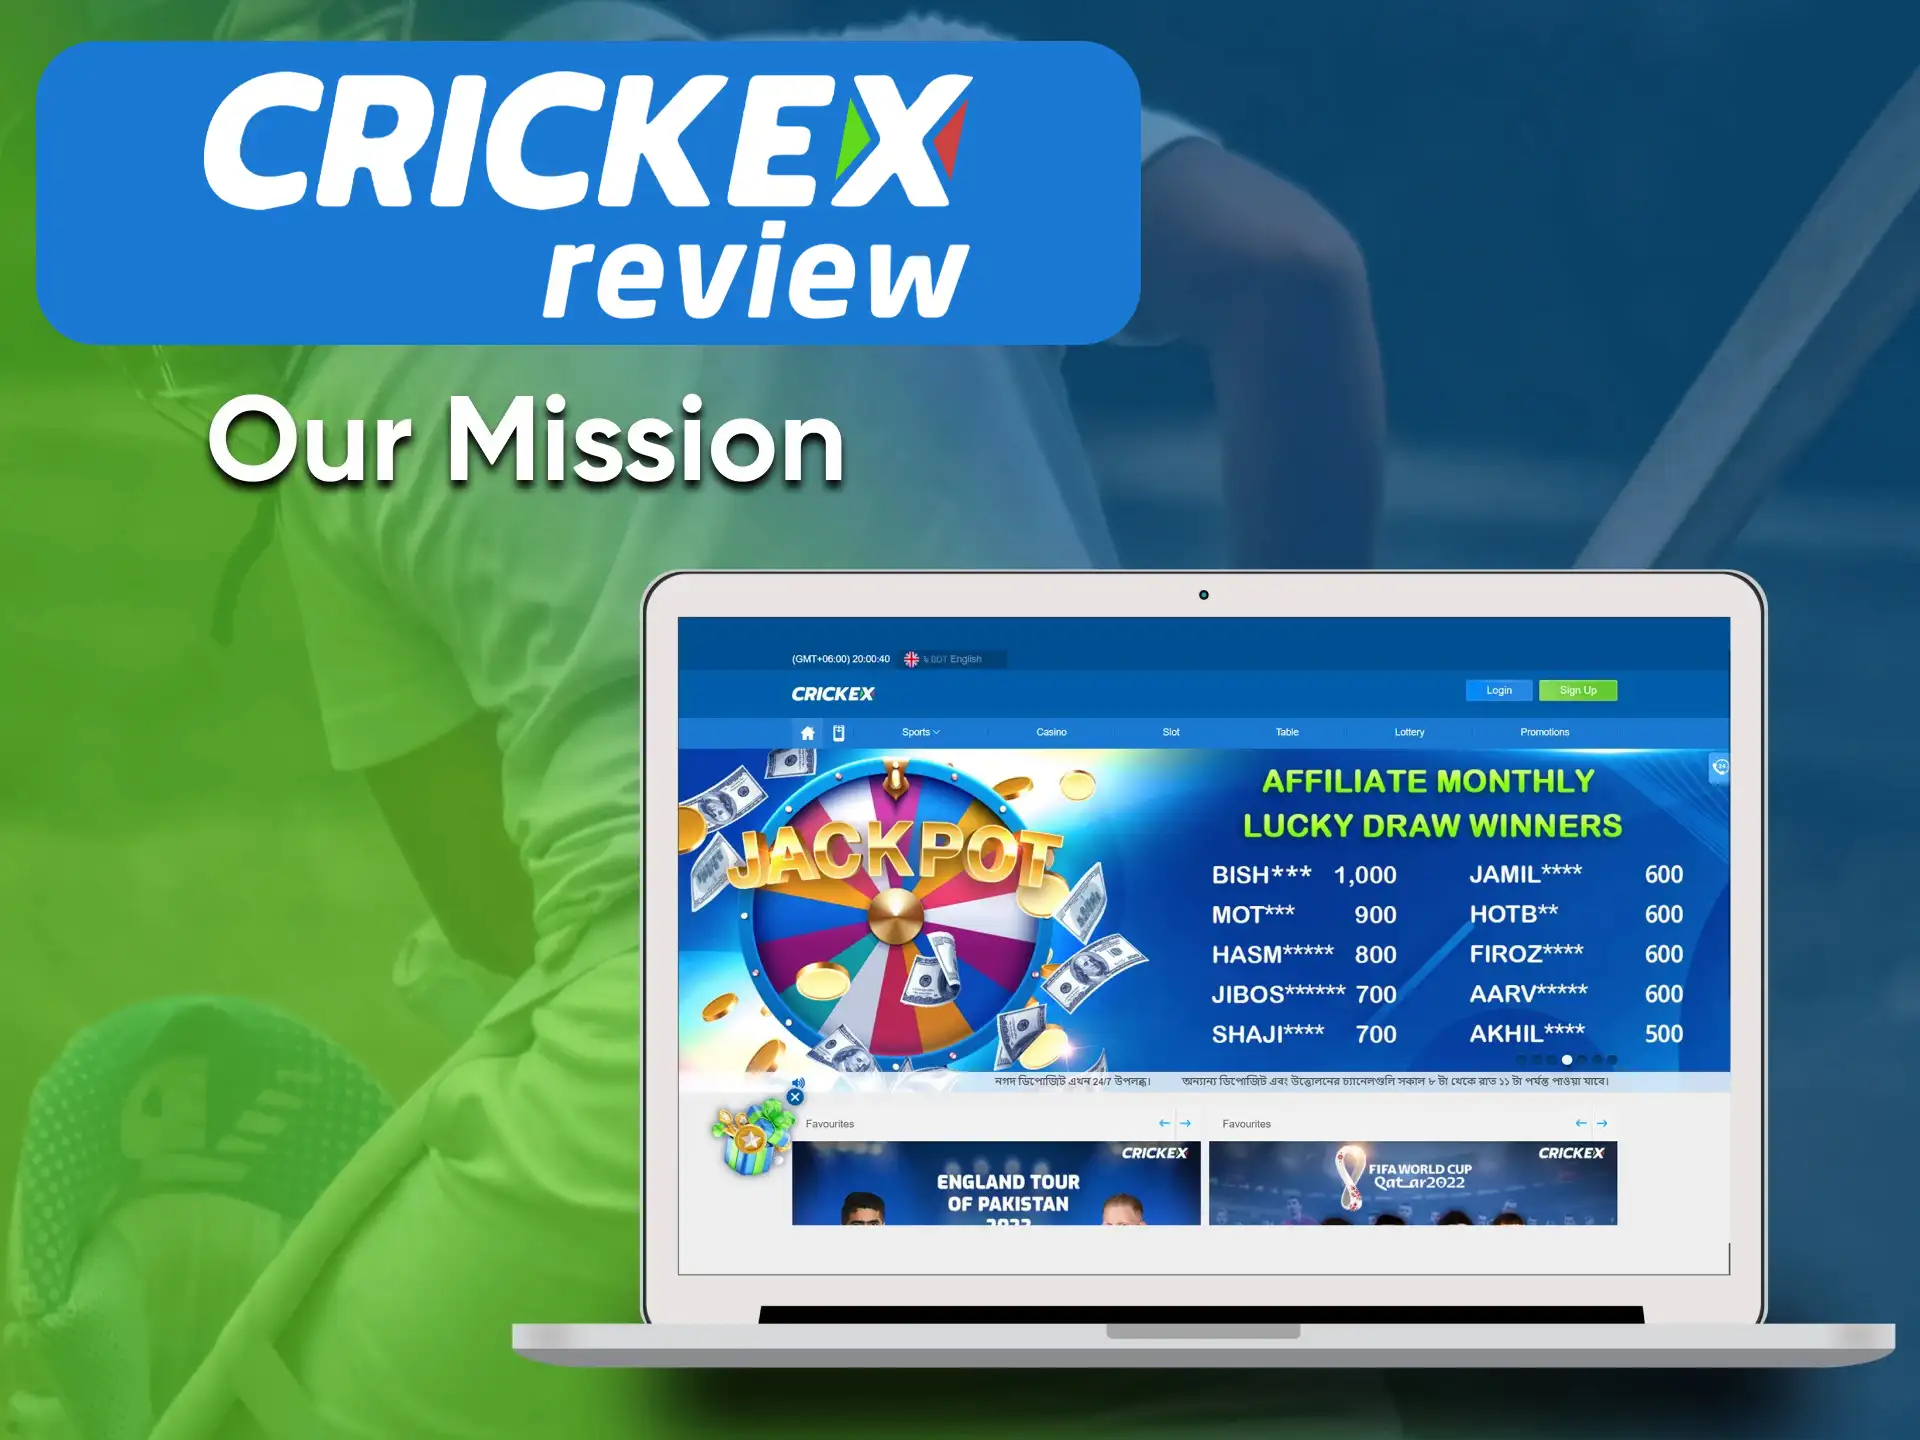 The Crickex team thinks about its users, so we are improving our service.